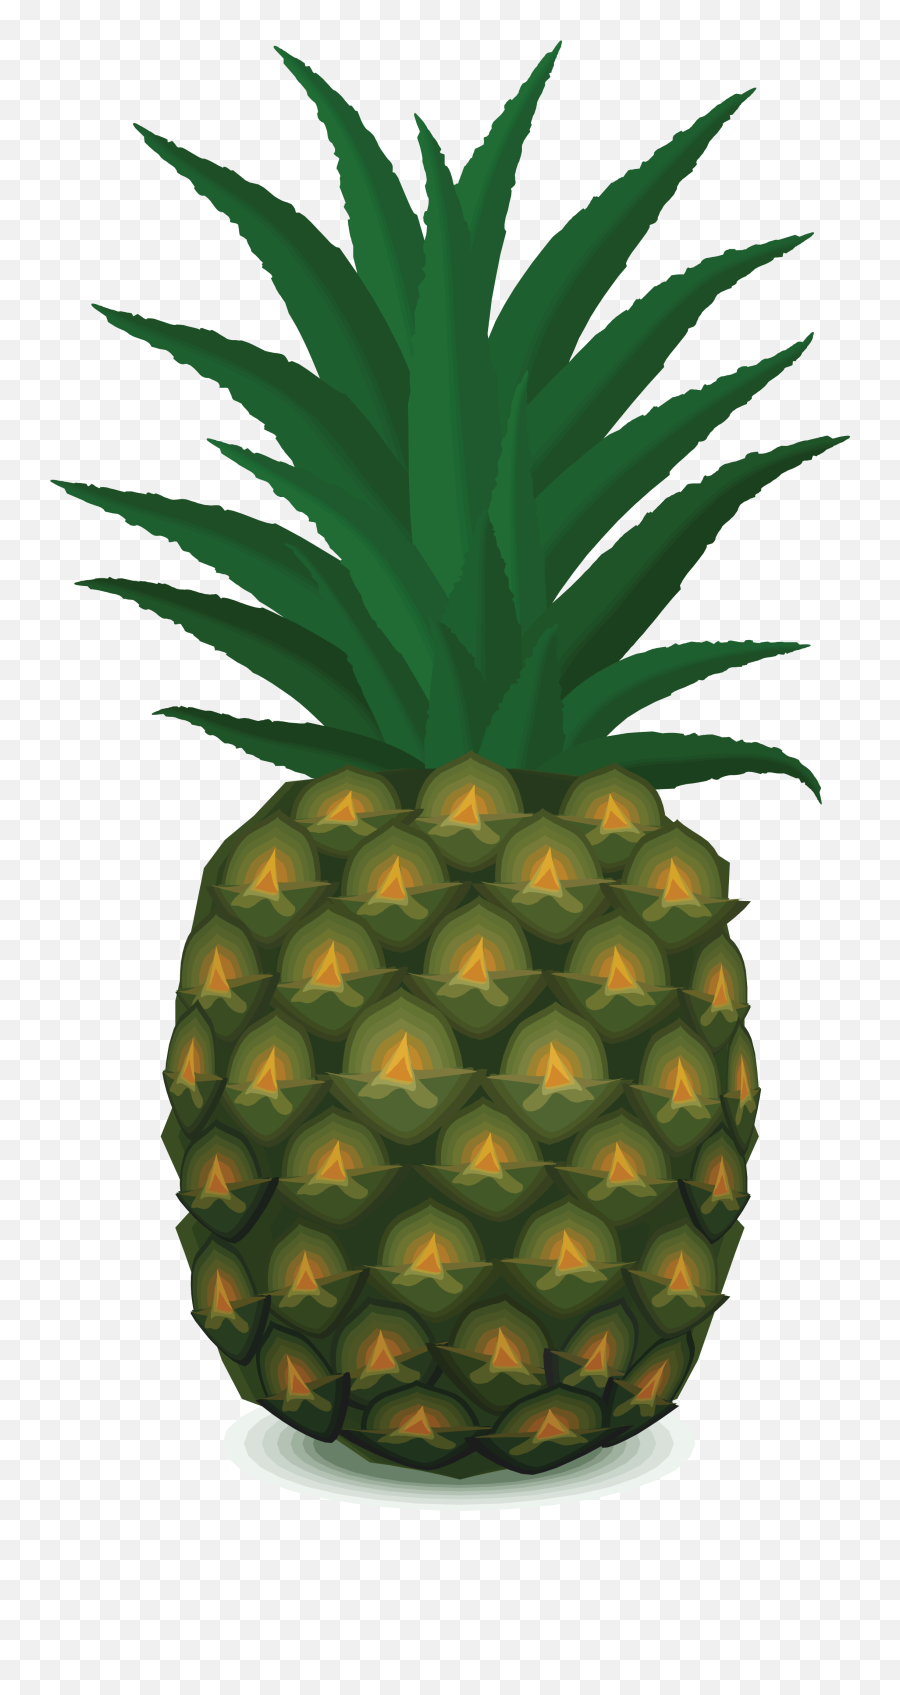 Download Pineapple Png Image Download - Silhouette Pineapple Clipart Transparent Background Emoji,Pineapple Pizza Emoji